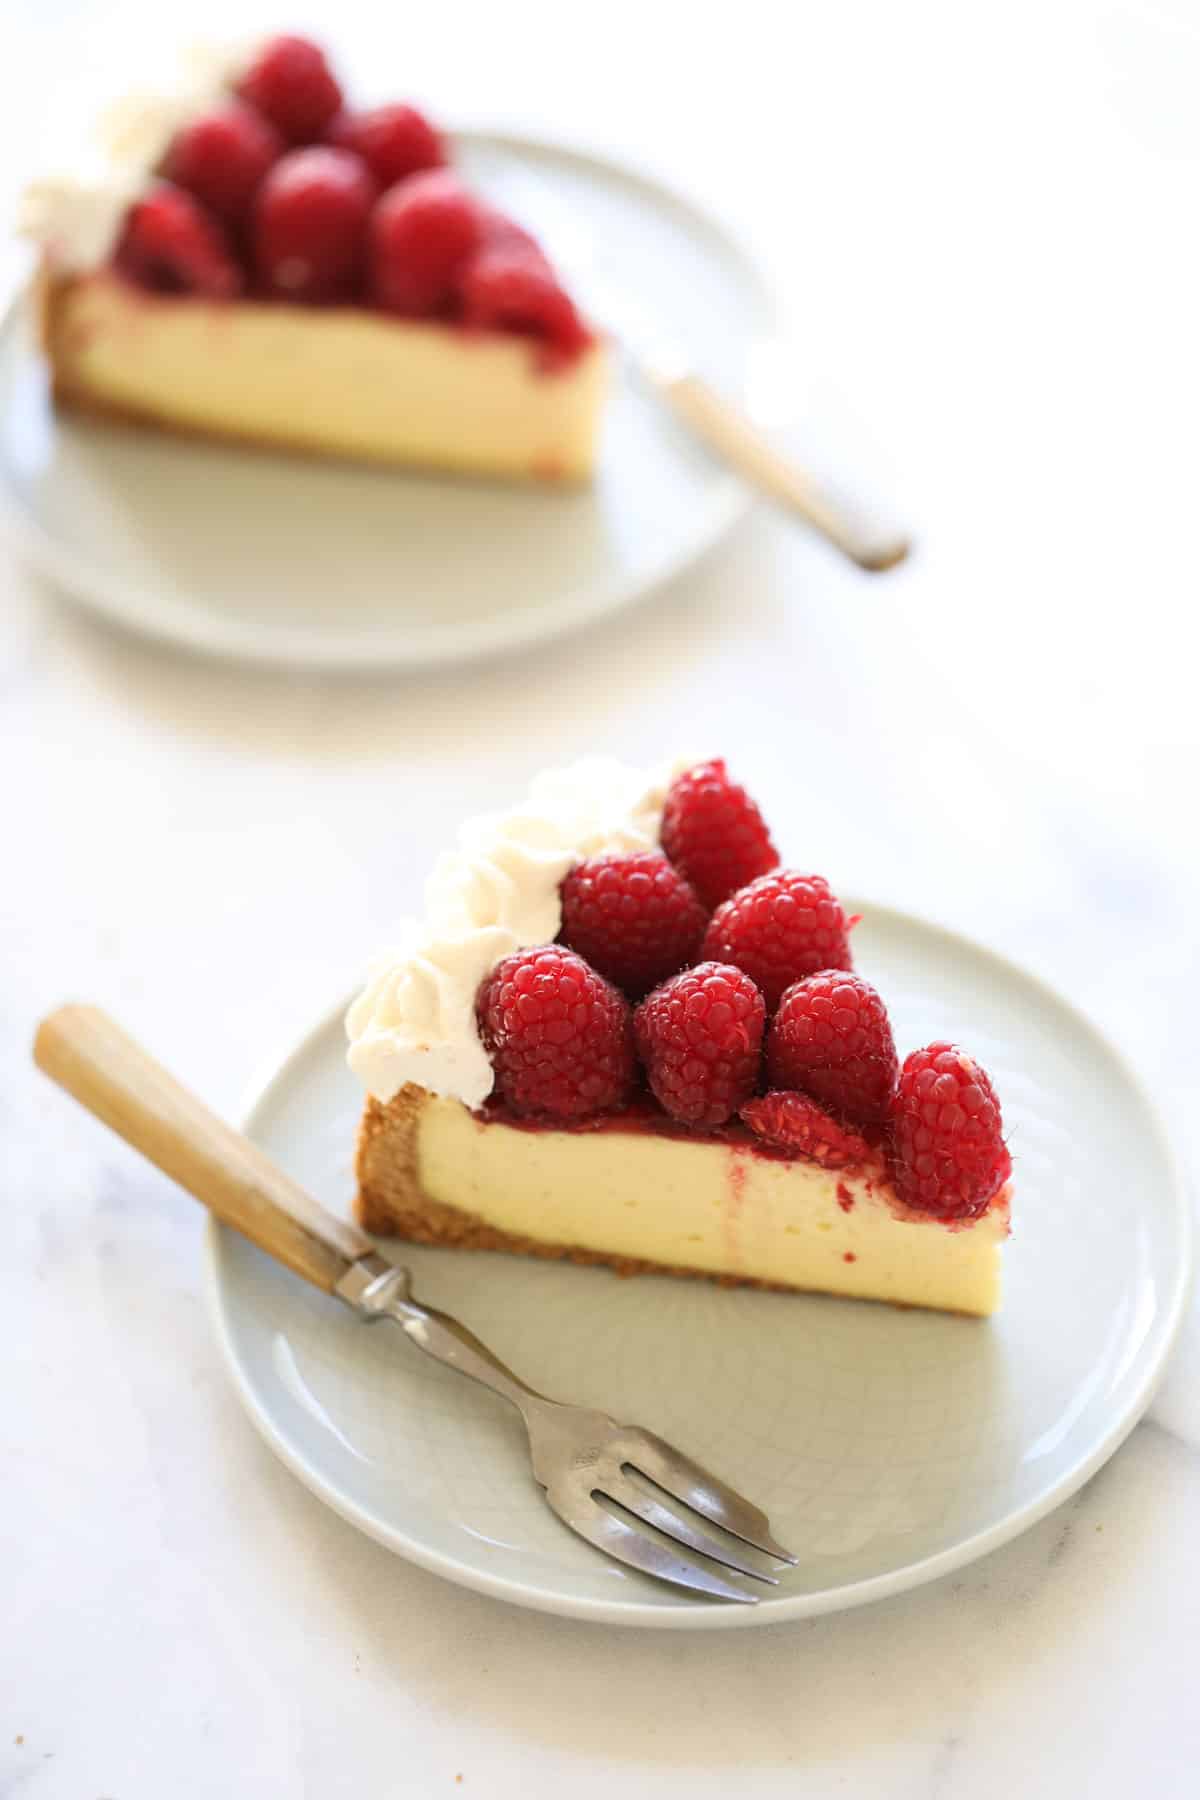 Two slices of cheesecake on plates with fresh raspberries on top